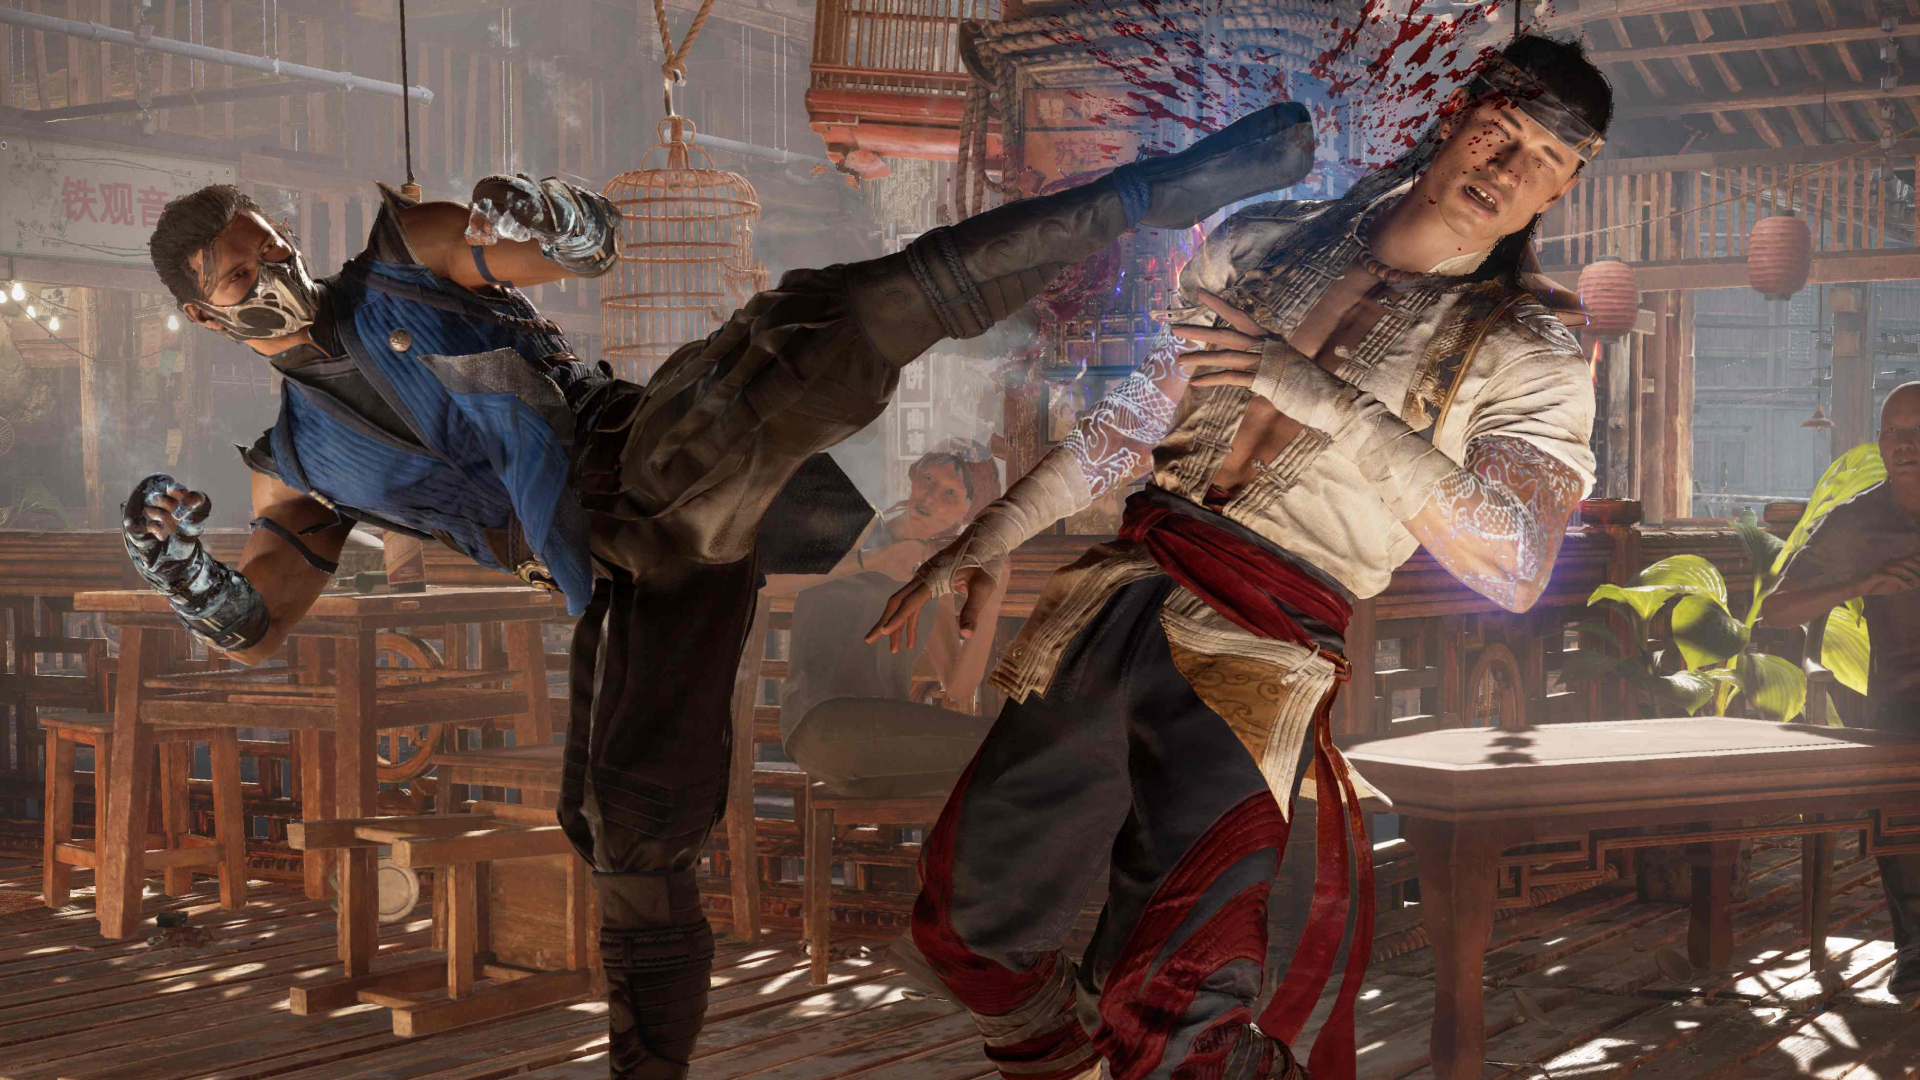 Mortal Kombat 1 won't have crossplay at launch, and it's unclear whether  it'll eventually come to PC at all